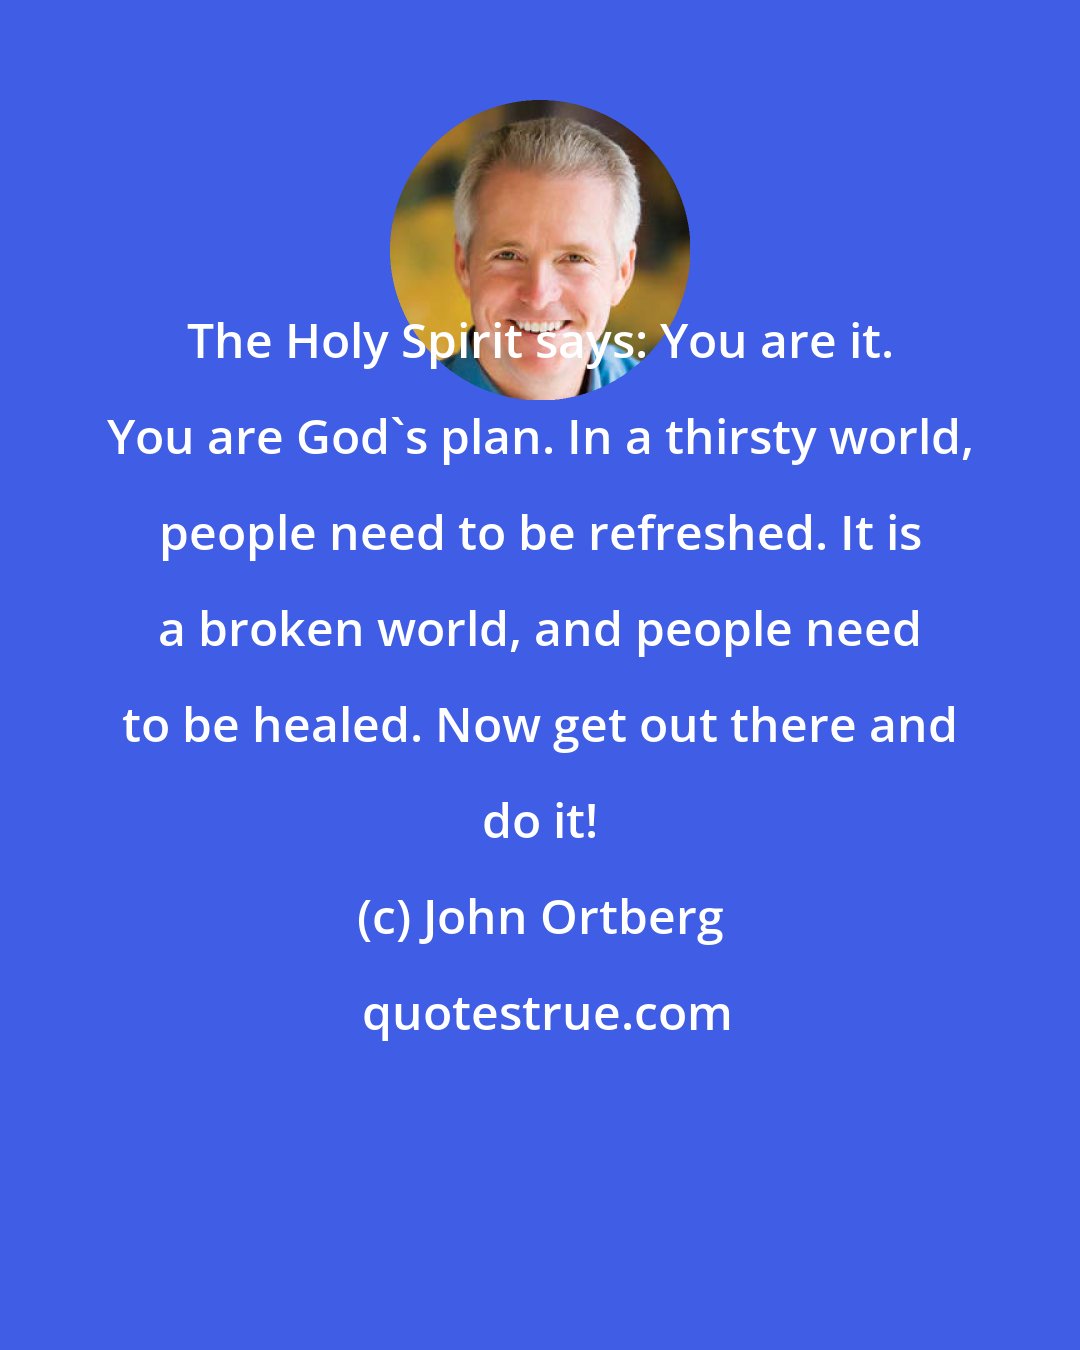 John Ortberg: The Holy Spirit says: You are it. You are God's plan. In a thirsty world, people need to be refreshed. It is a broken world, and people need to be healed. Now get out there and do it!